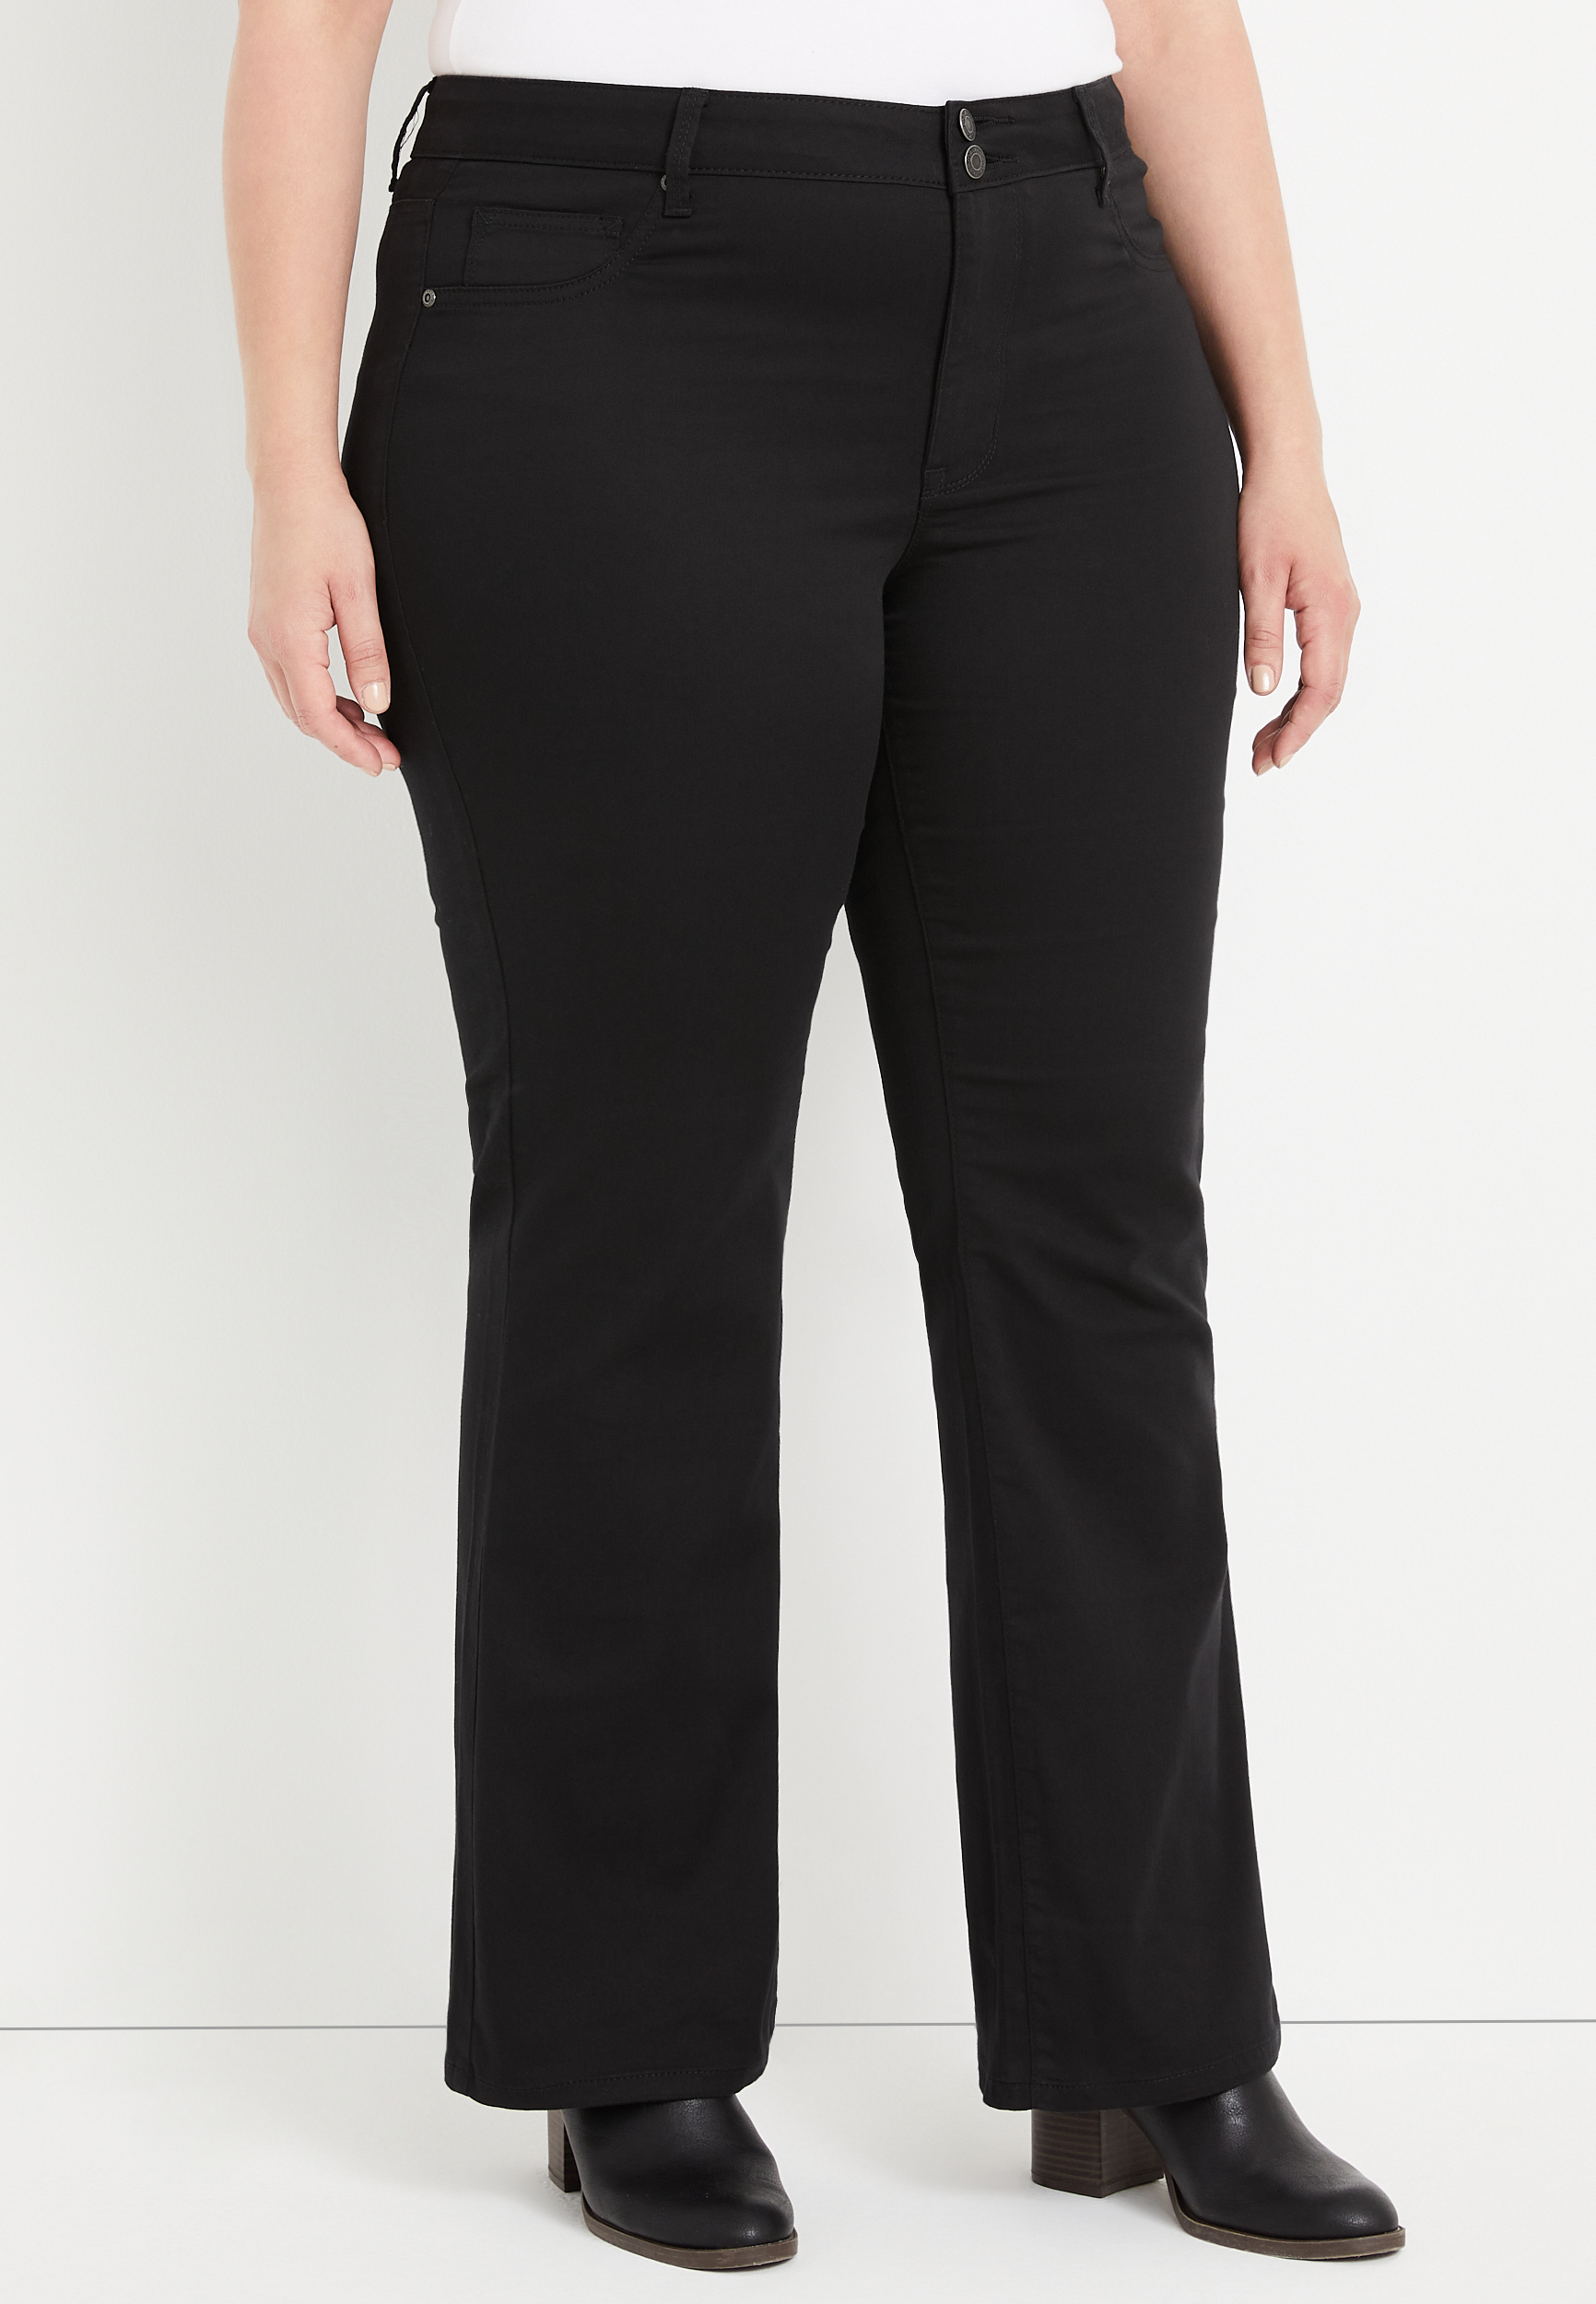 Plus Size m jeans by maurices™ Black Flare High Rise Jean | maurices